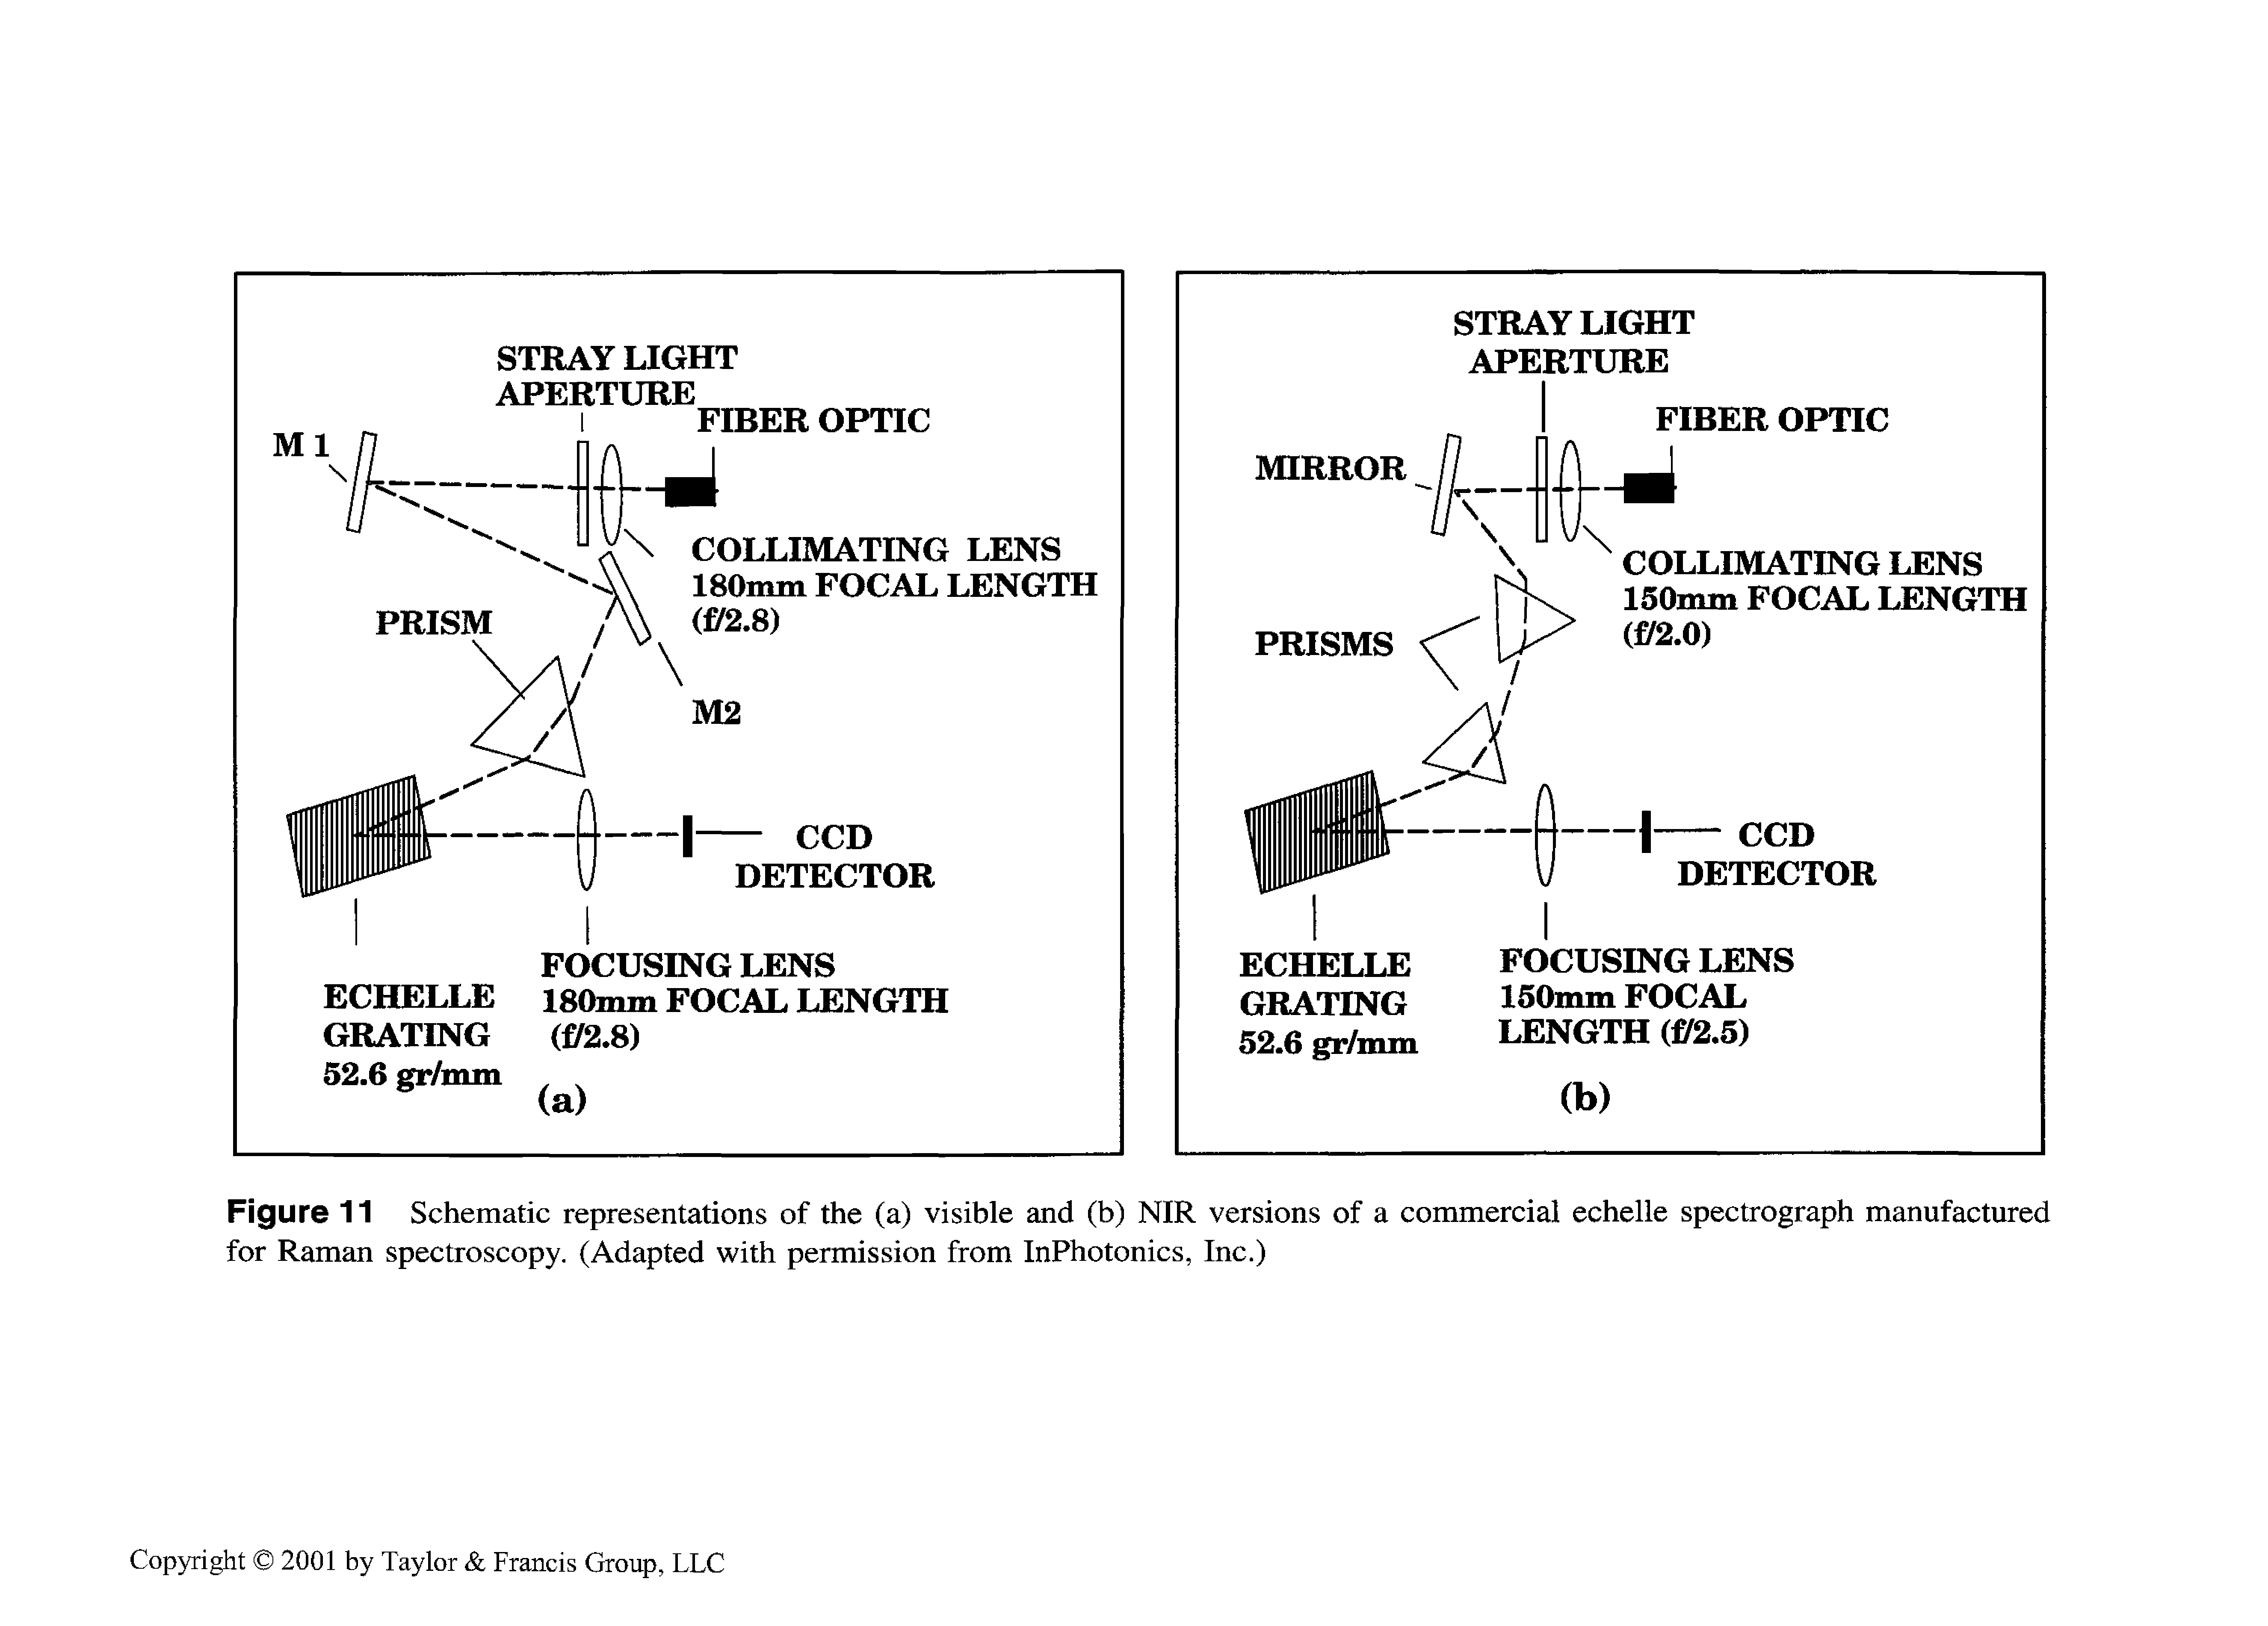 Figure 11 Schematic representations of the (a) visible and (b) NIR versions of a commercial echelle spectrograph manufactured for Raman spectroscopy. (Adapted with permission from InPhotonics, Inc.)...